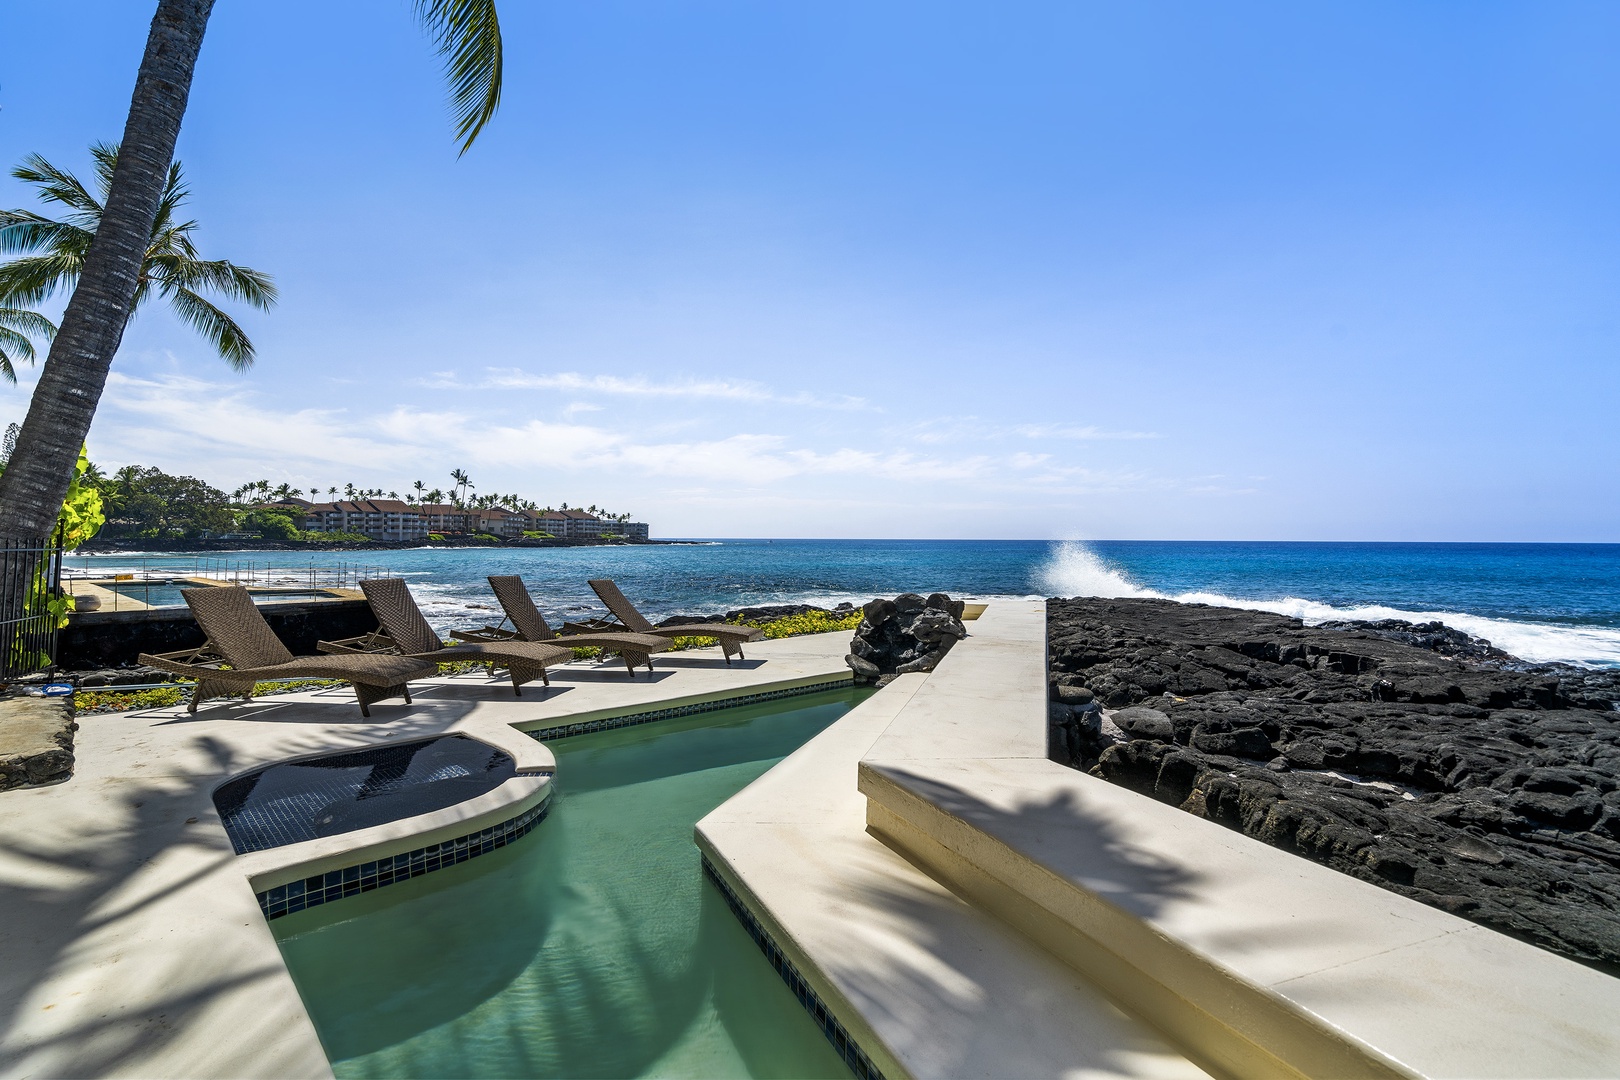 Kailua Kona Vacation Rentals, Dolphin Manor - Relax pool side as the waves crash on the point!